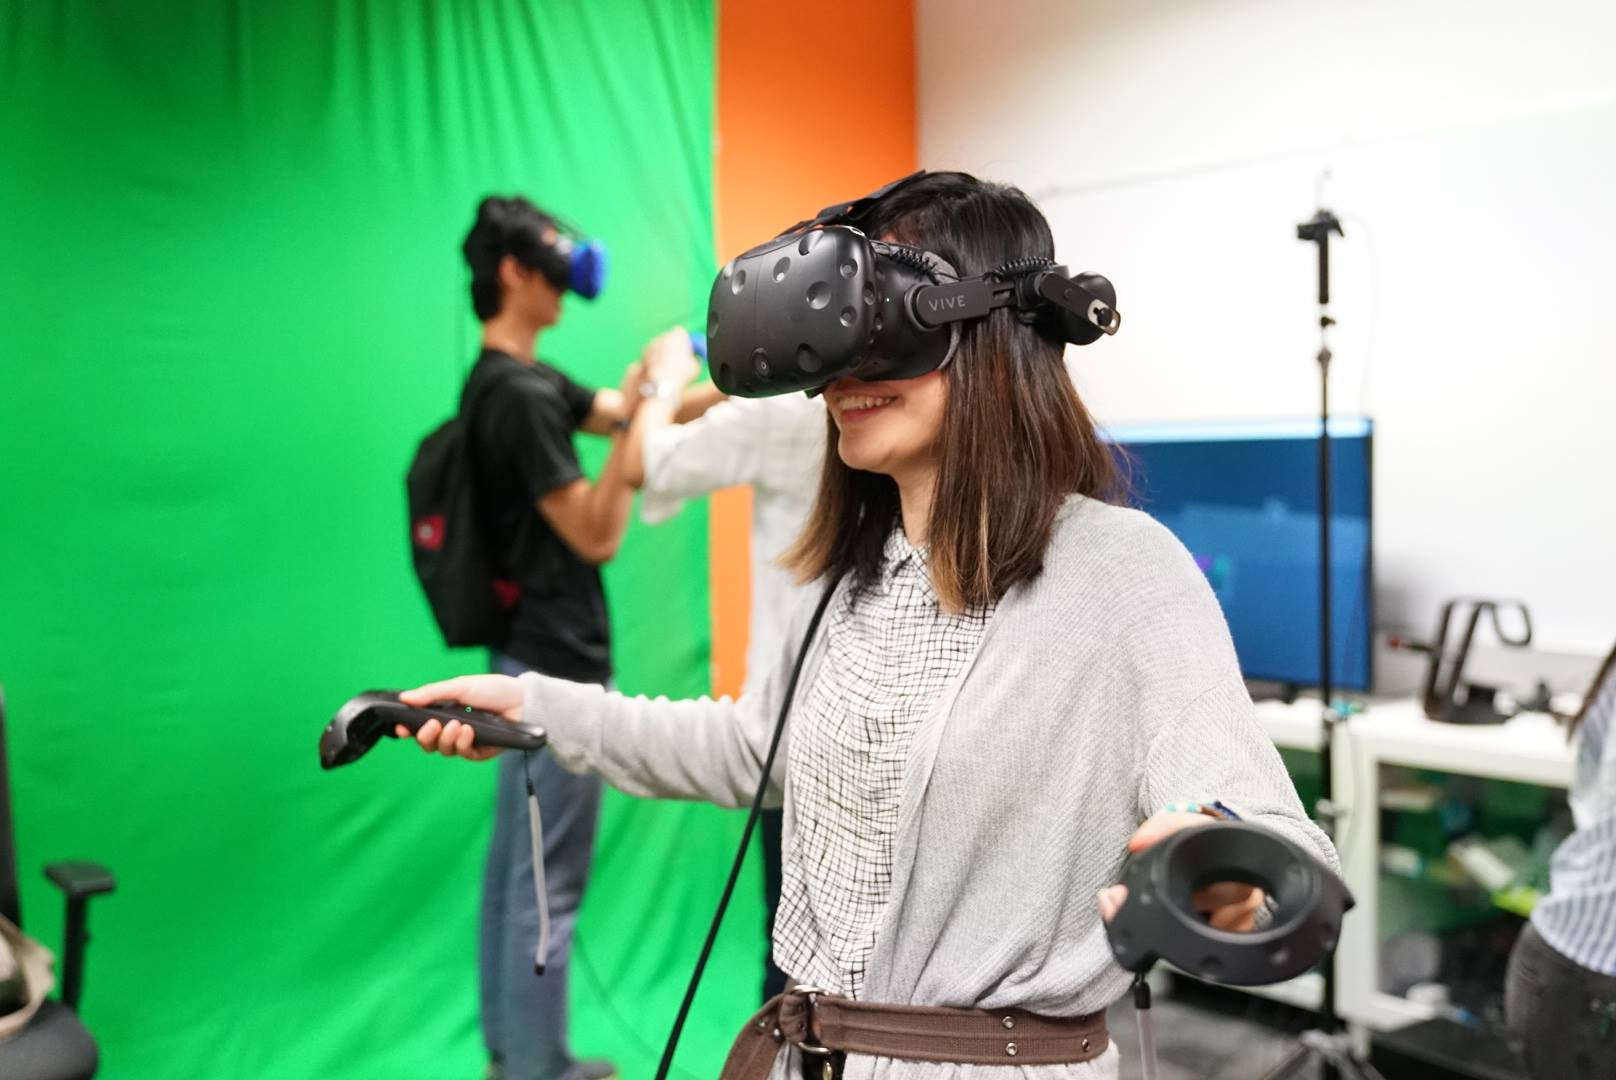 Woman in VR headset enjoying a game at IMDA's PIXEL AR/VR lab, highlighting Singapore's innovative technology space